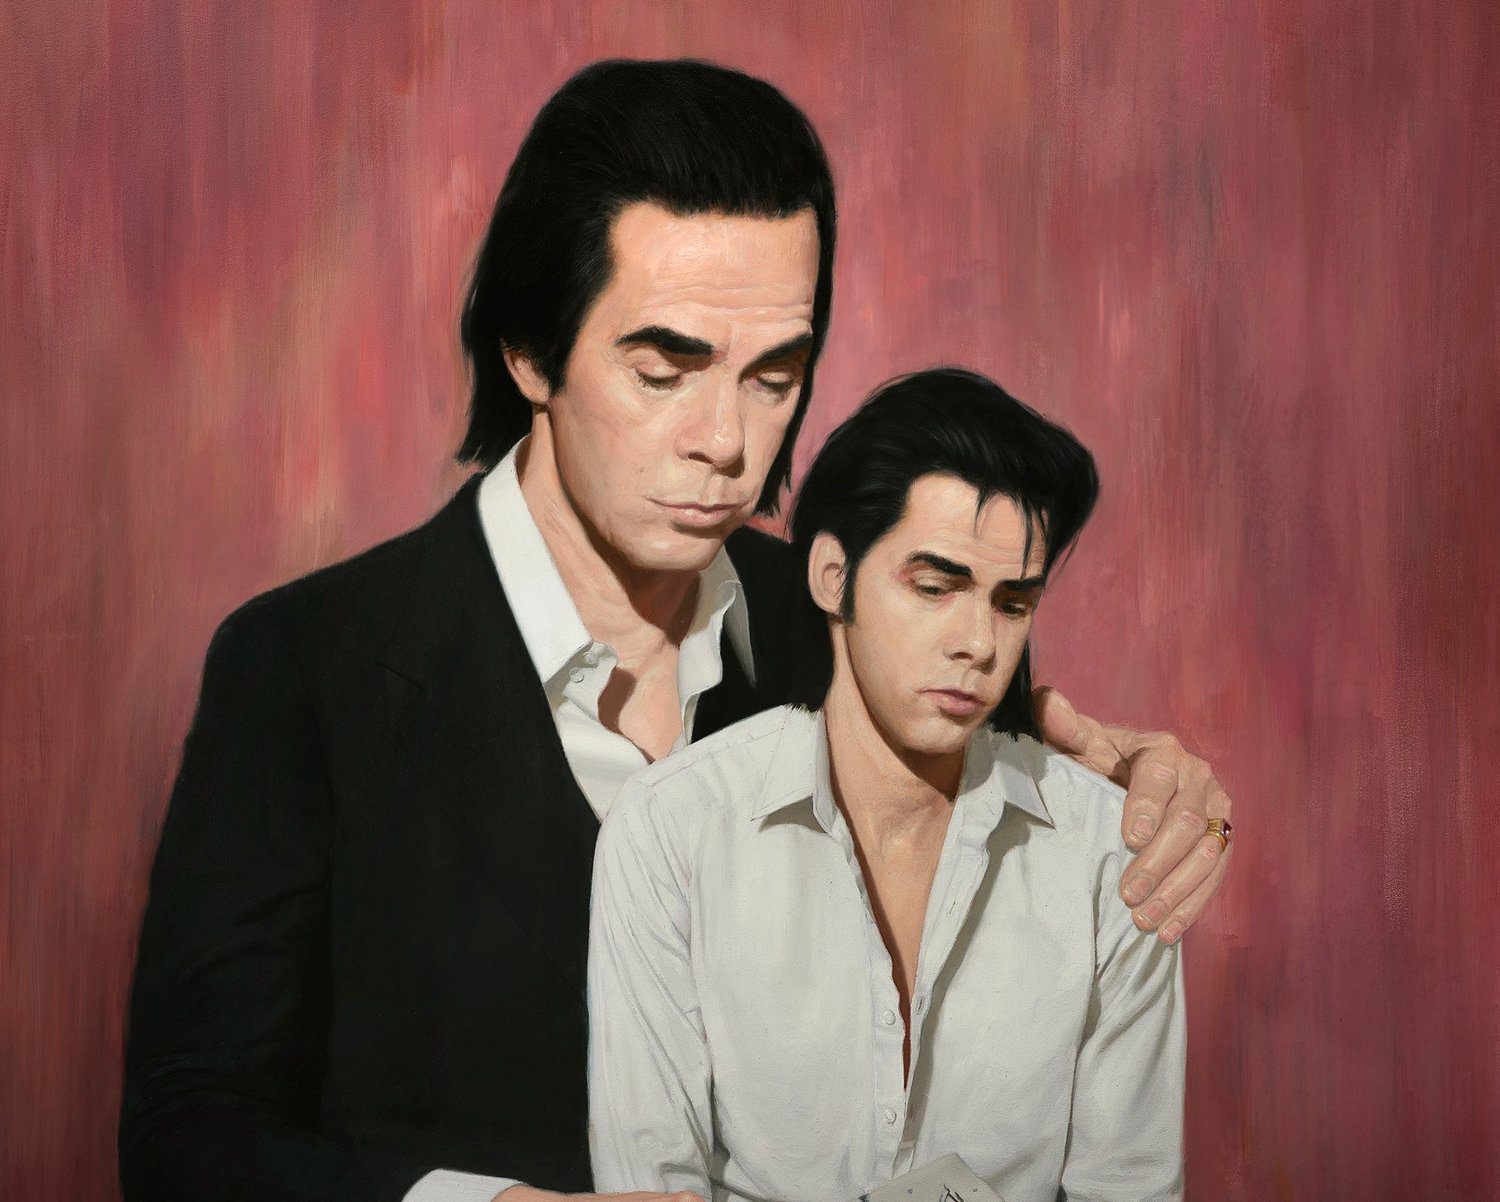 Inside Nick Cave—the Stranger Than Kindness exhibition